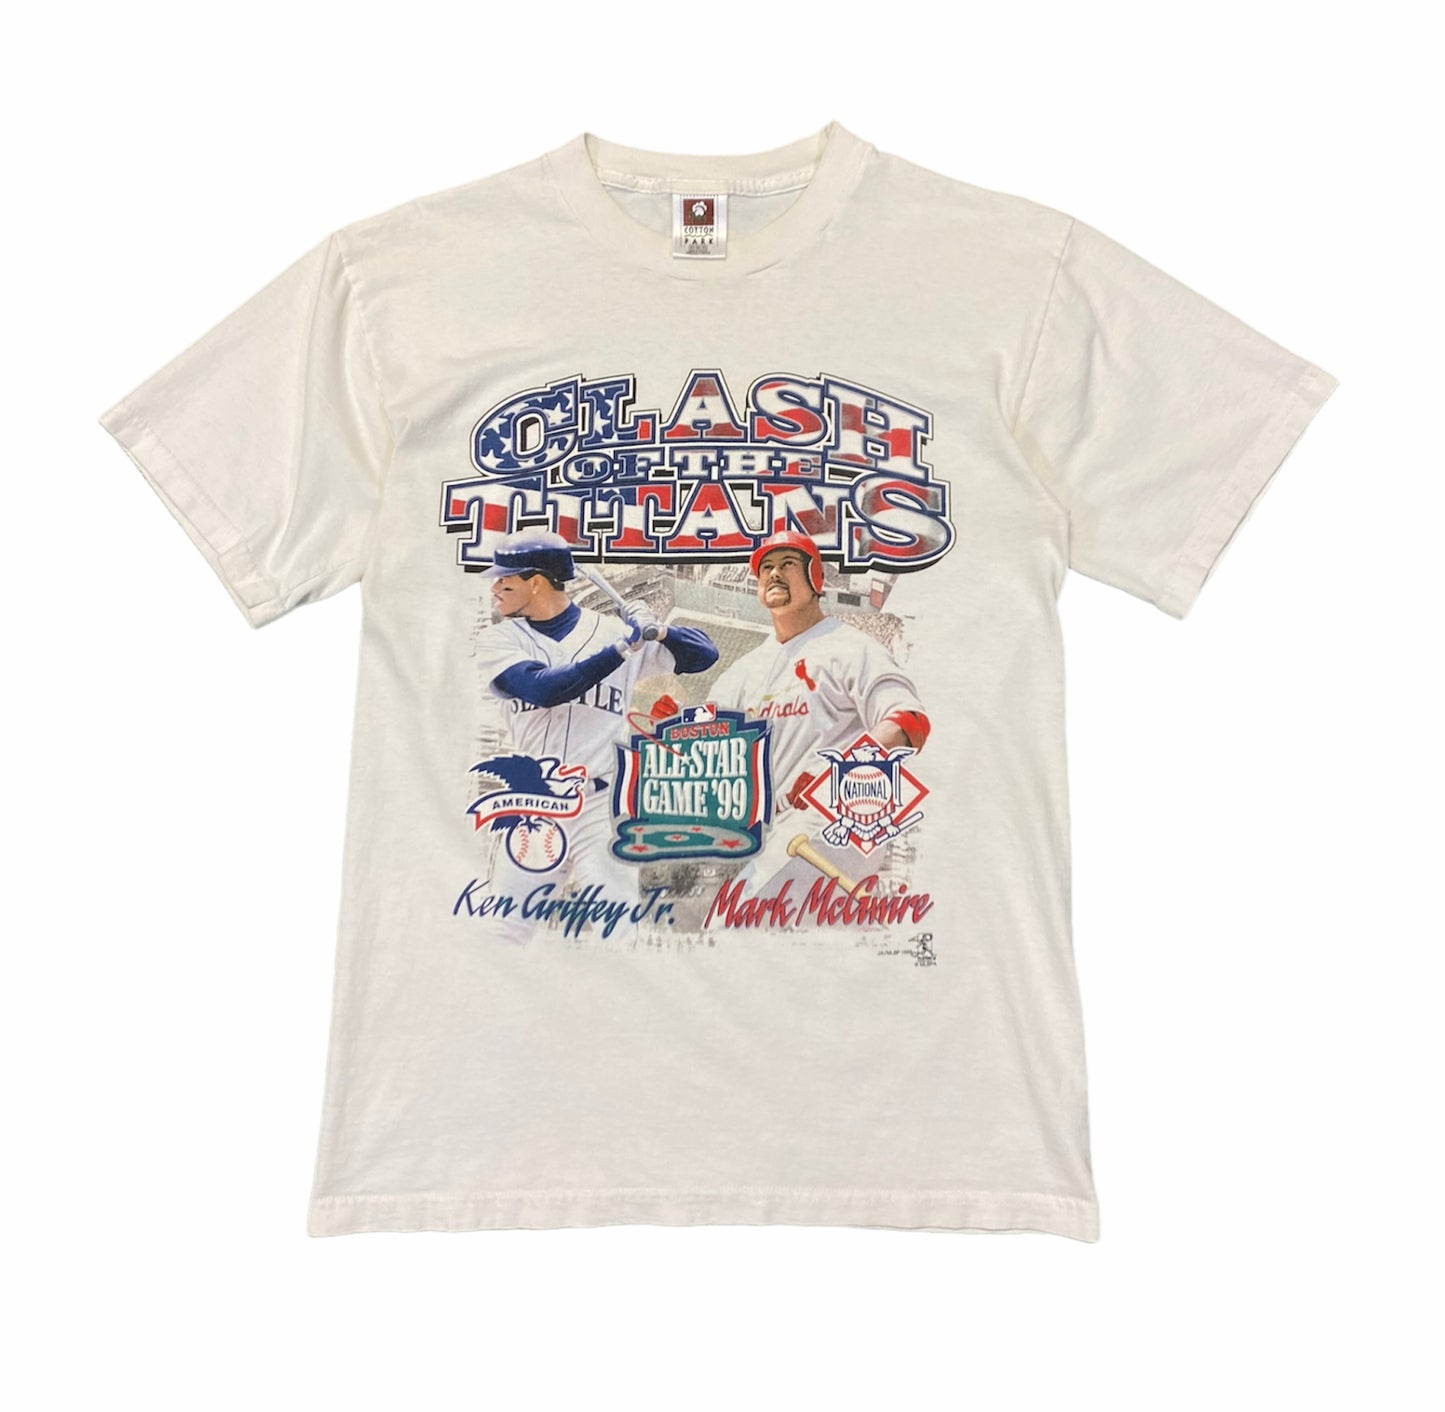 1999 Yankees vs Red Sox American League Championship Vintage T